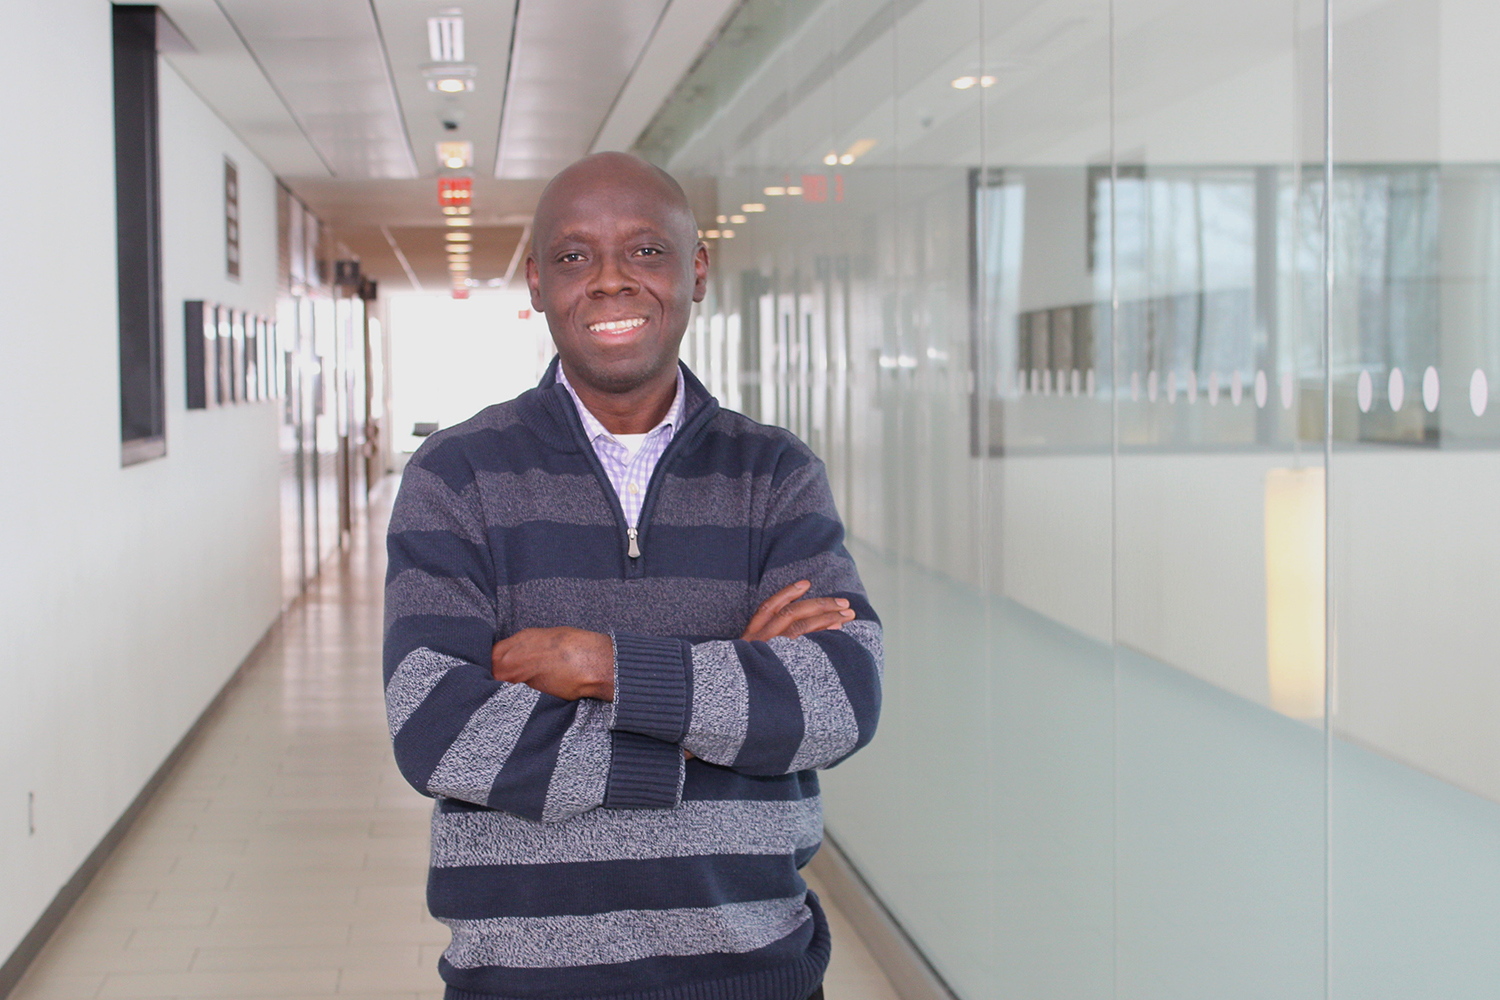 Dr. Olakunle Akingbola stands in a hallway on the Orillia campus with his arms crossed and smiles at the camera